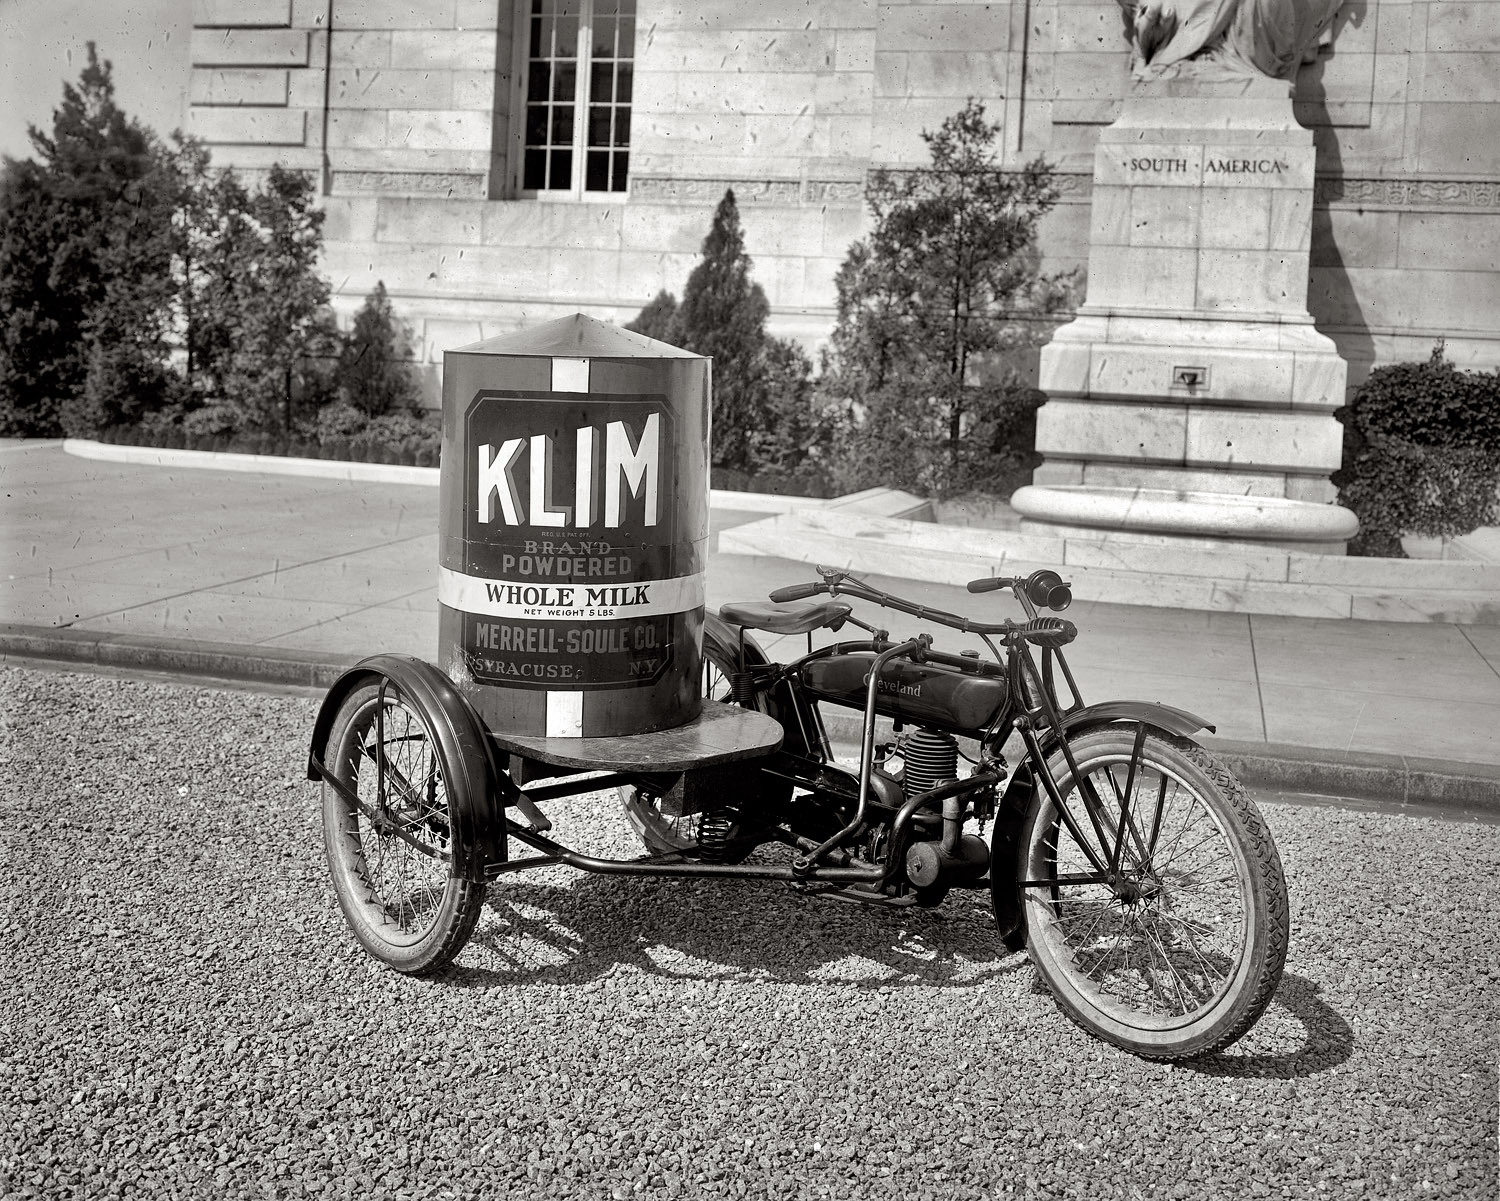 "James L. Owens & Sons." A sidecar of Klim at the Pan American Union in Washington circa 1921. View full size. National Photo Company glass negative.